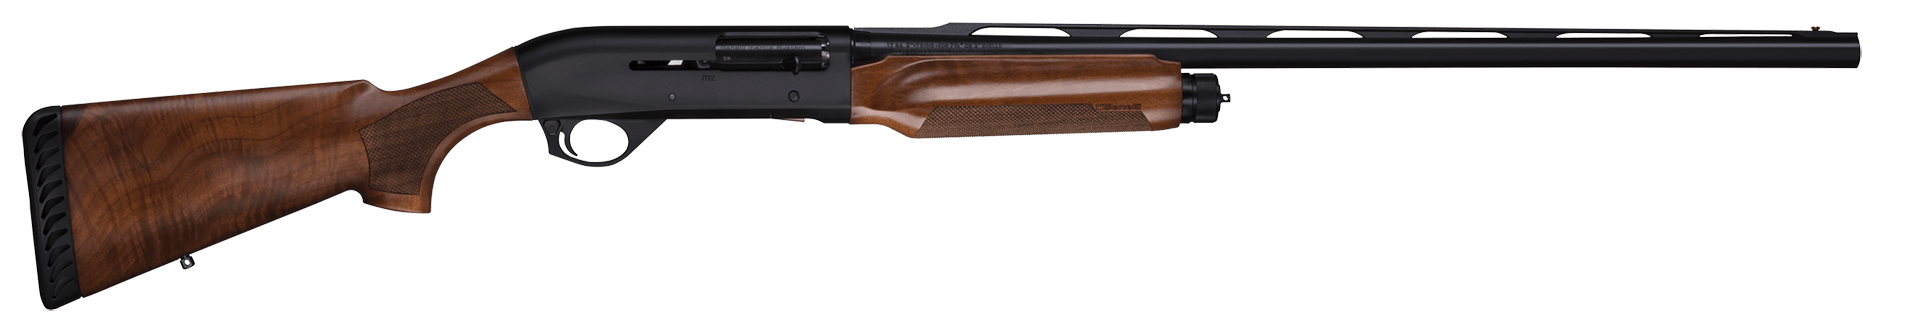 benelli-m2-wood.png